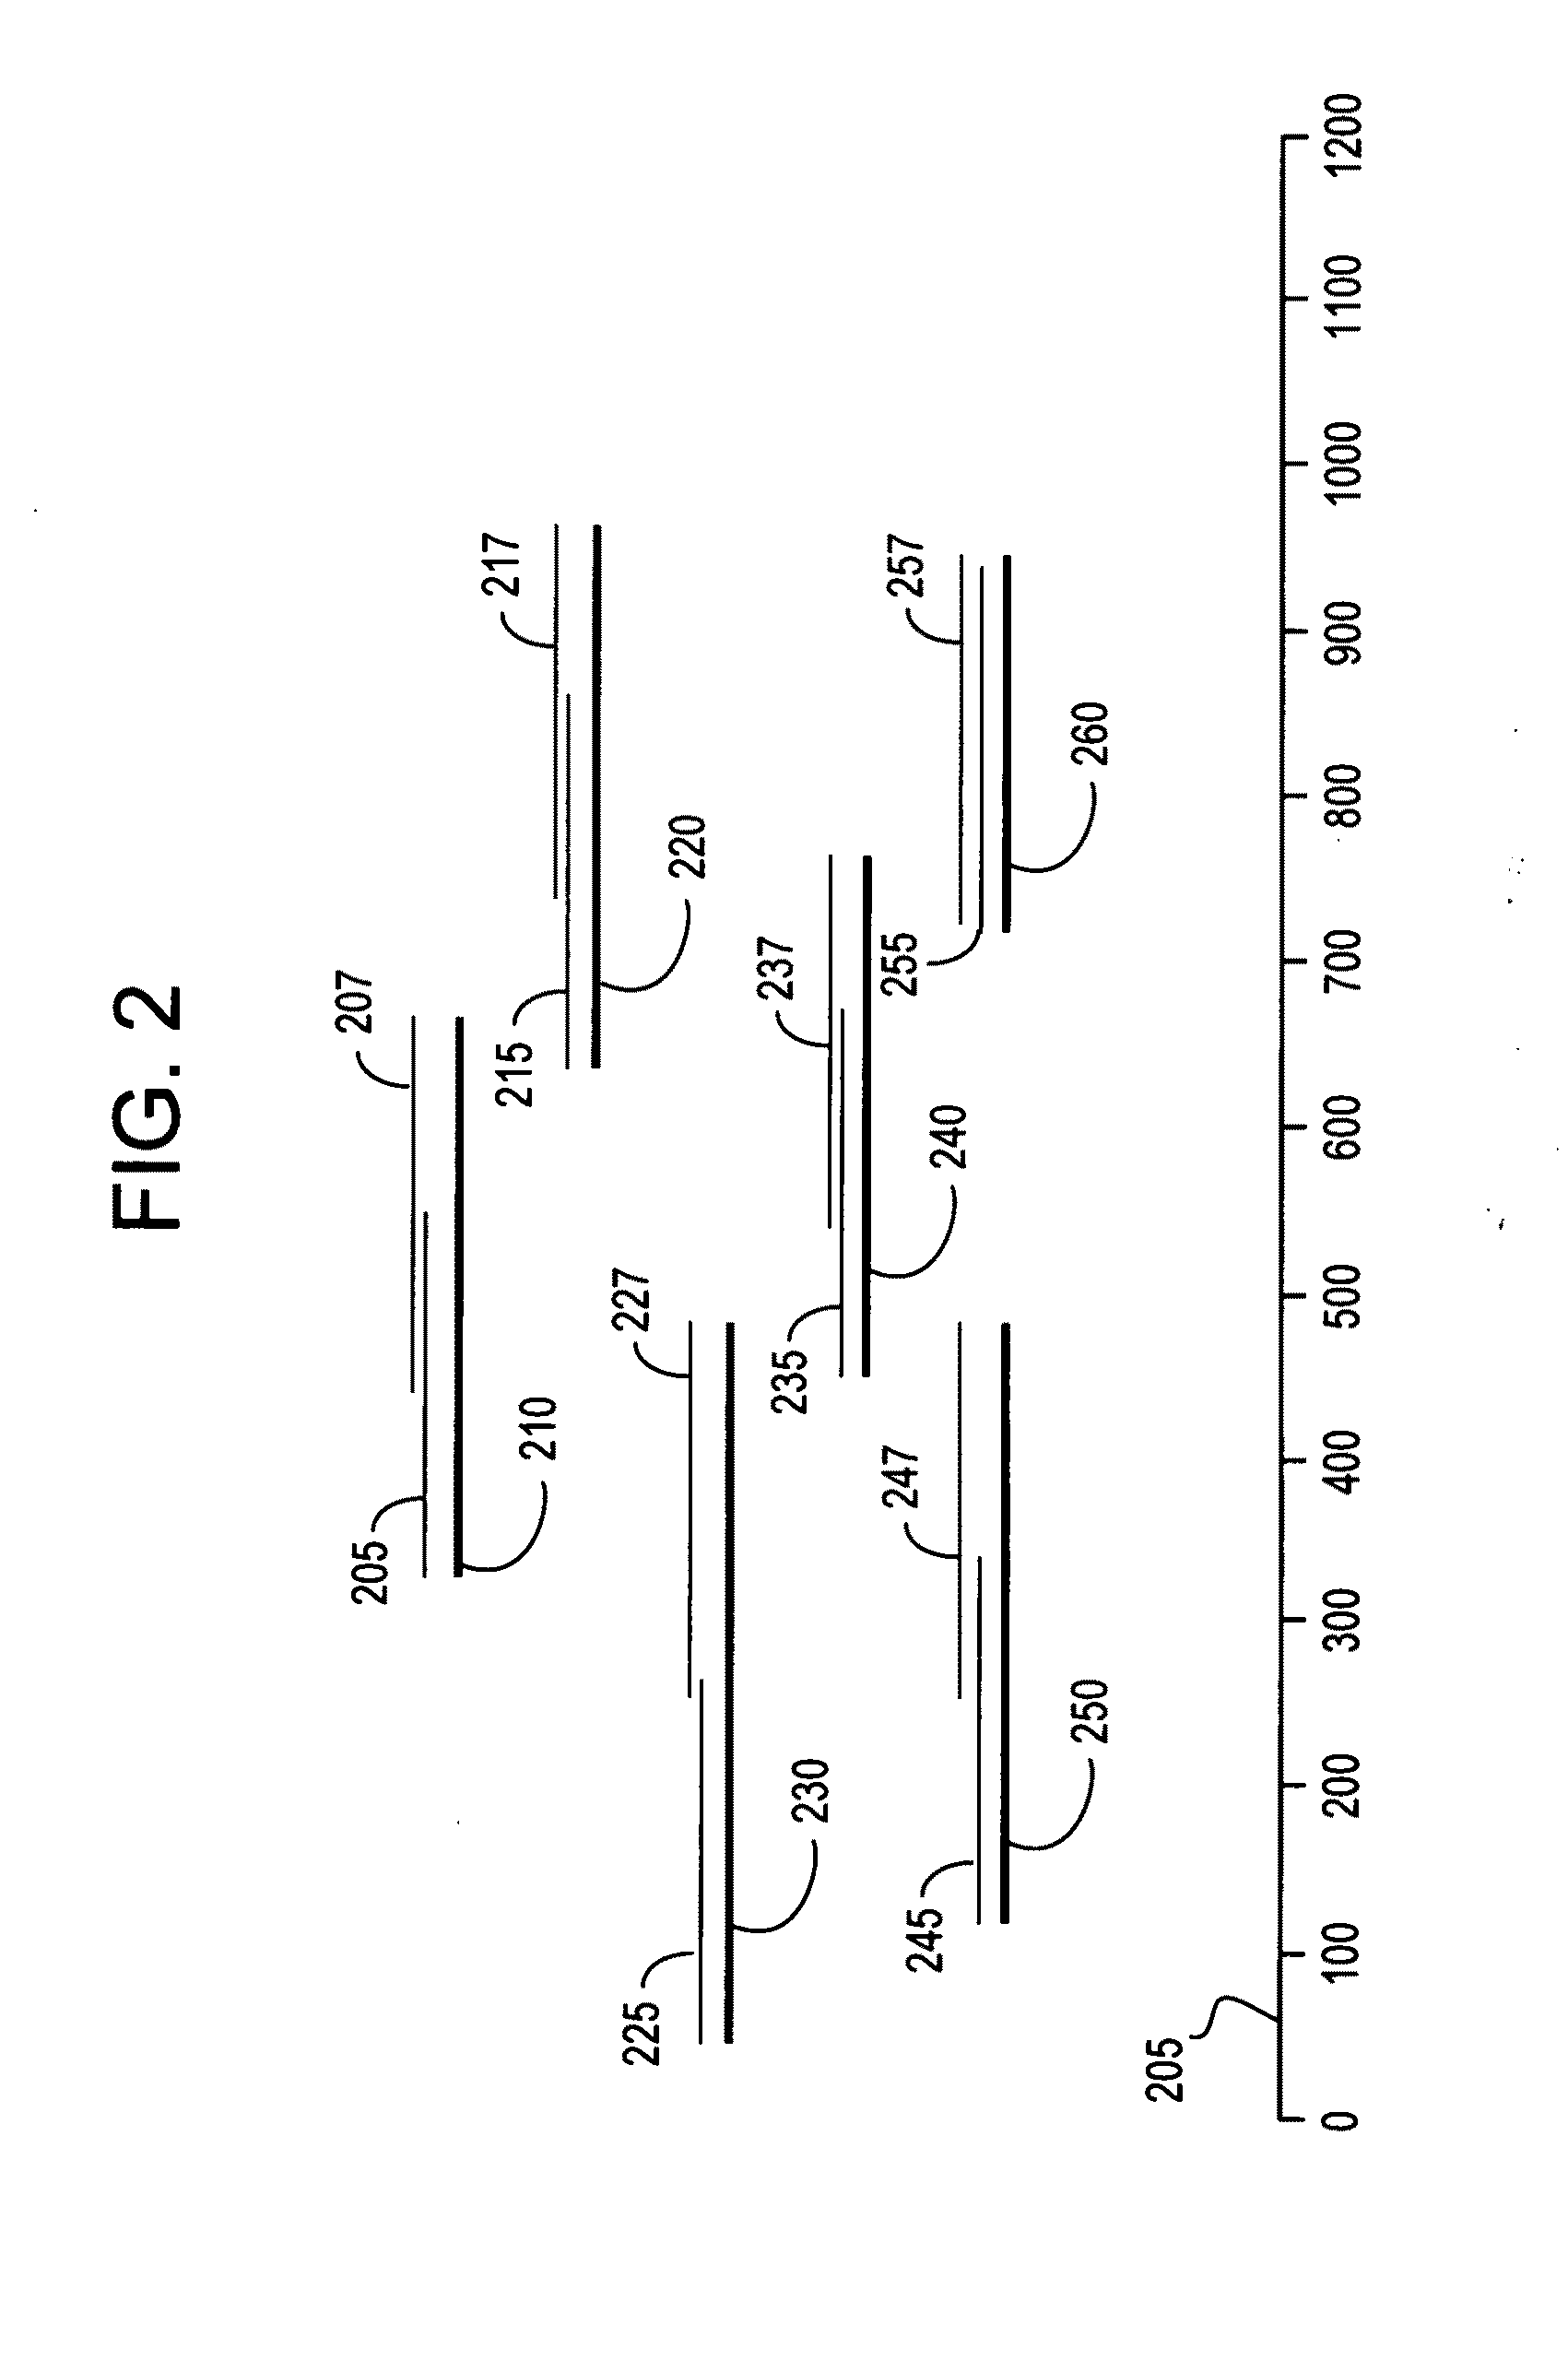 System and method for detection of HIV integrase variants